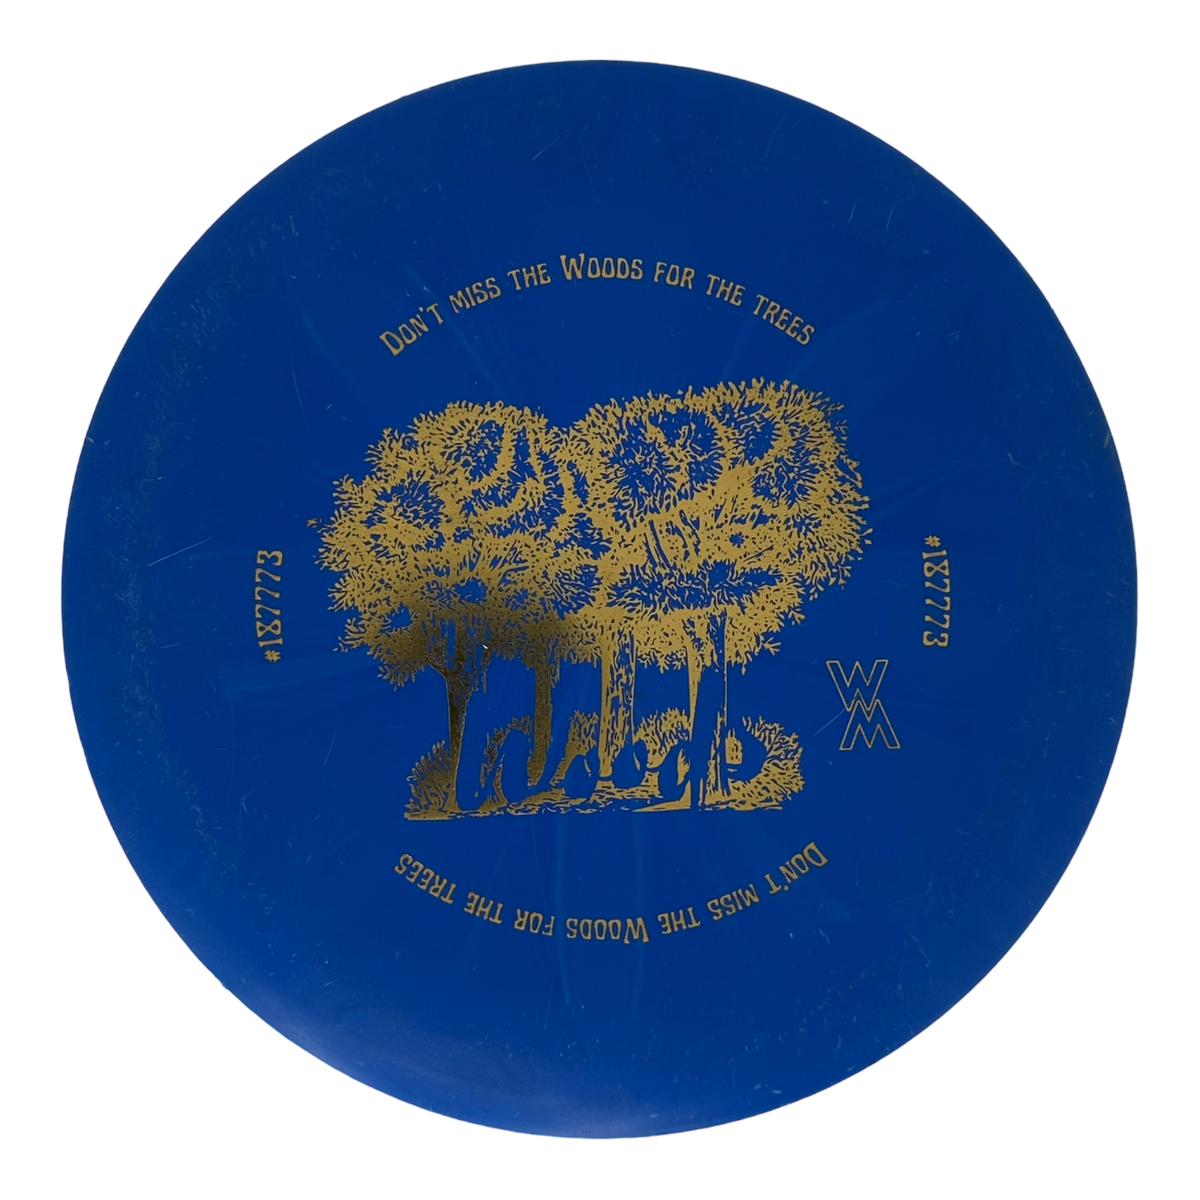 Dynamic Discs Pre-Owned Distance Drivers (Page 1)